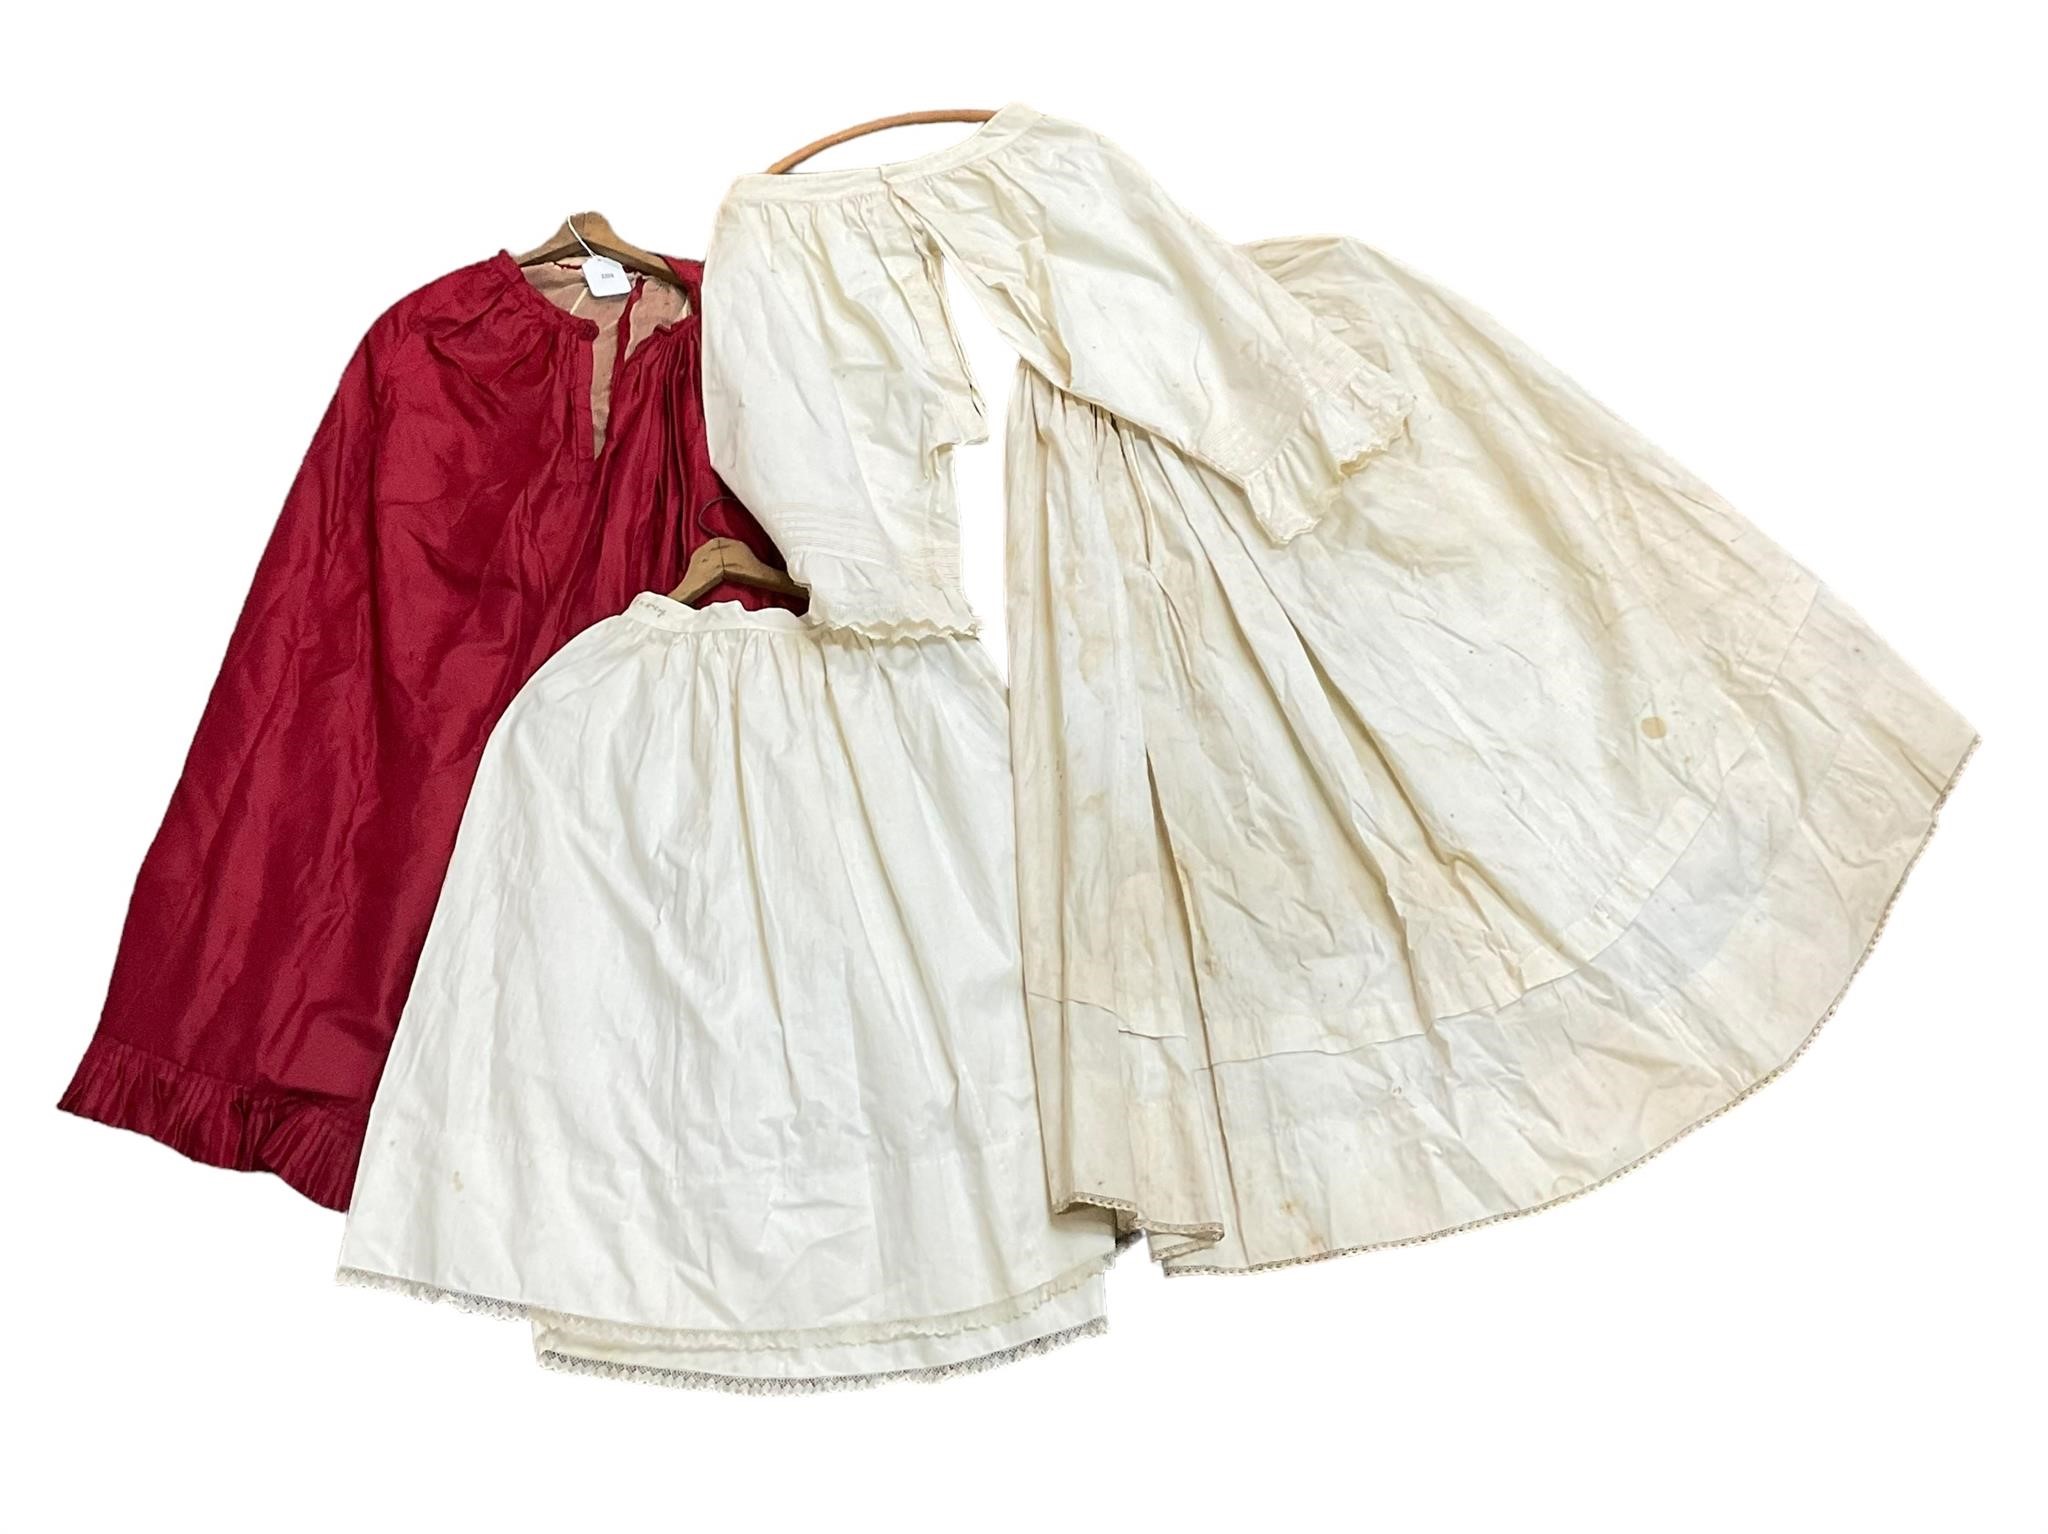 4 Victorian Pieces of Clothing